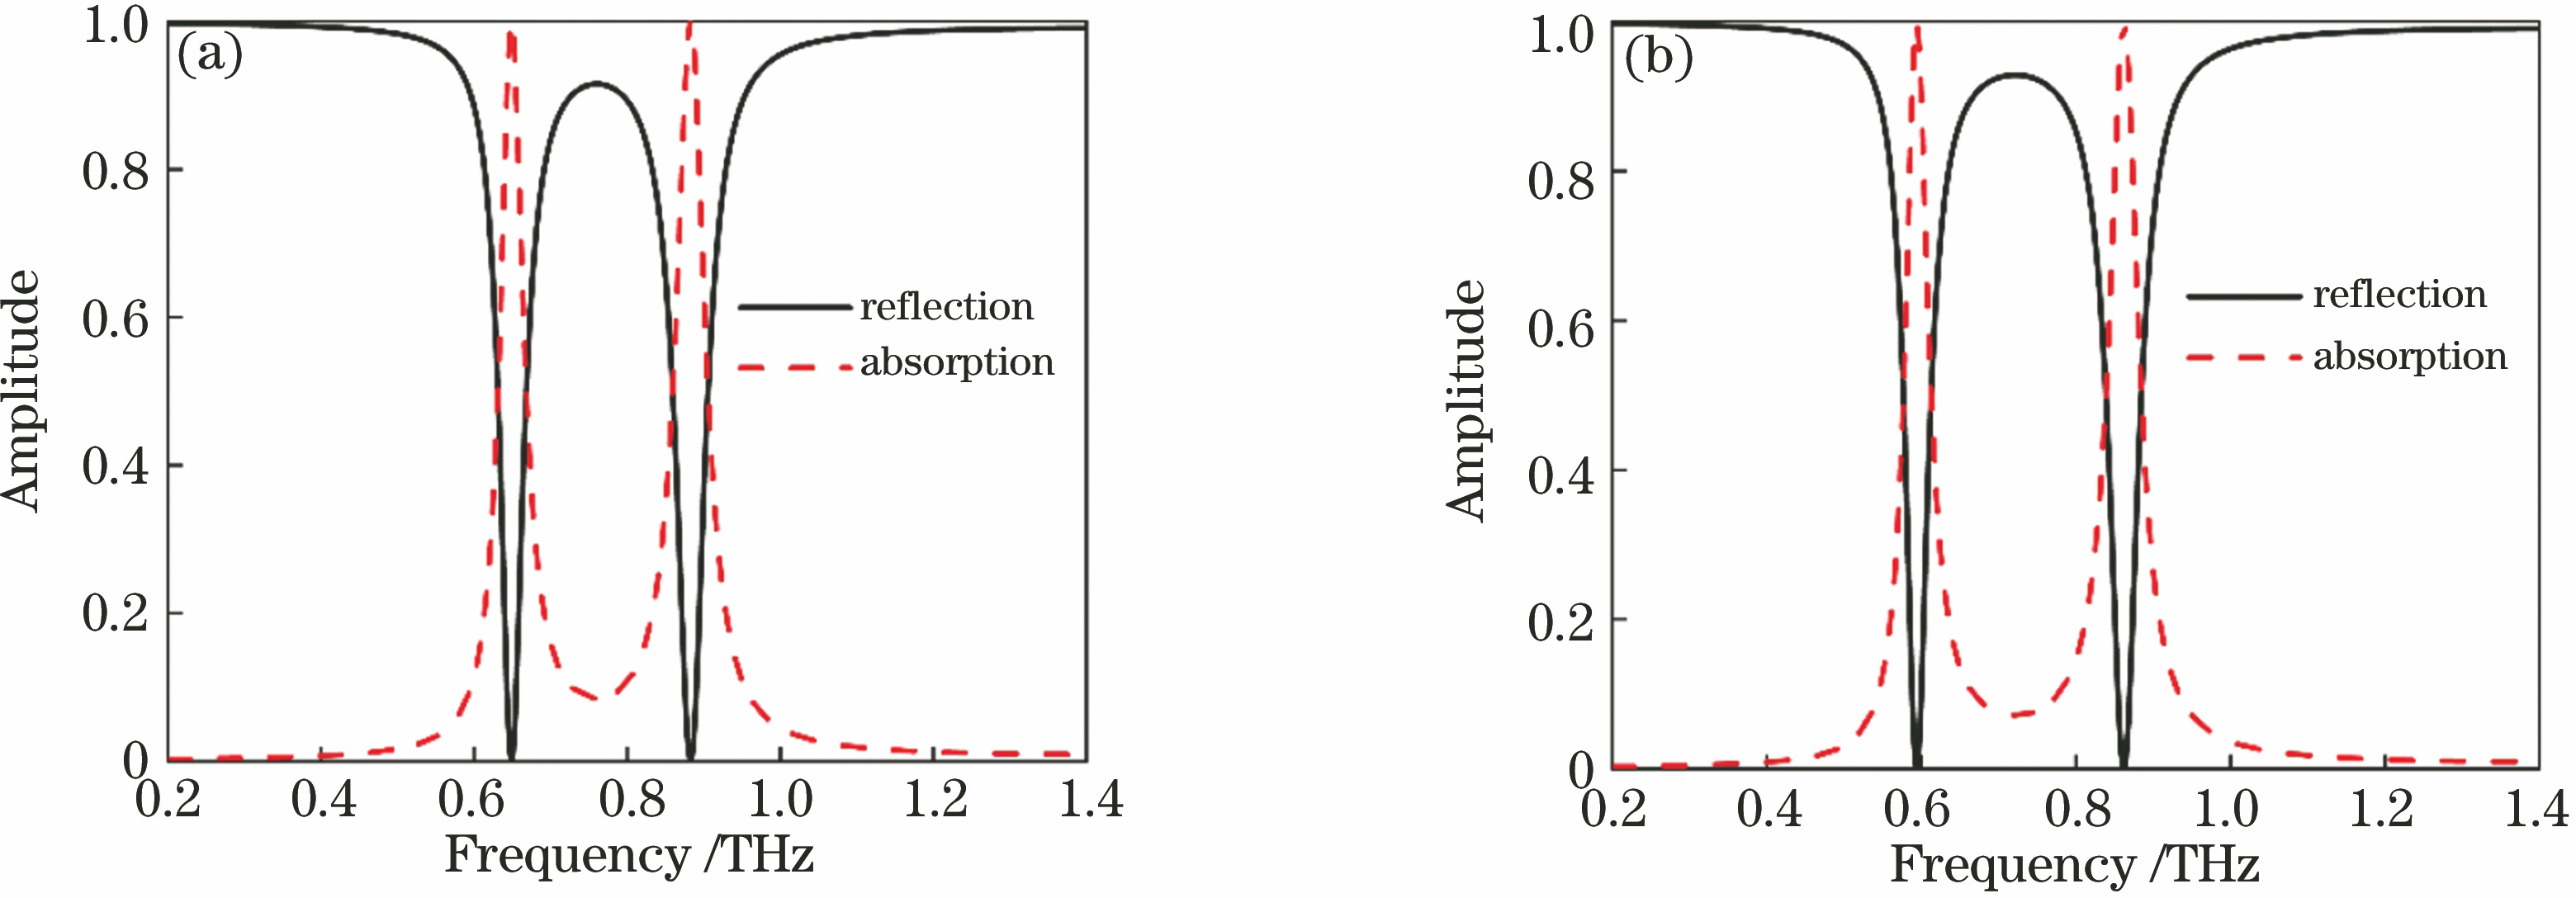 Reflection and absorption spectra of the sensors when there is no analyte in the microfluidic channel. (a) Sensor A; (b) sensor B